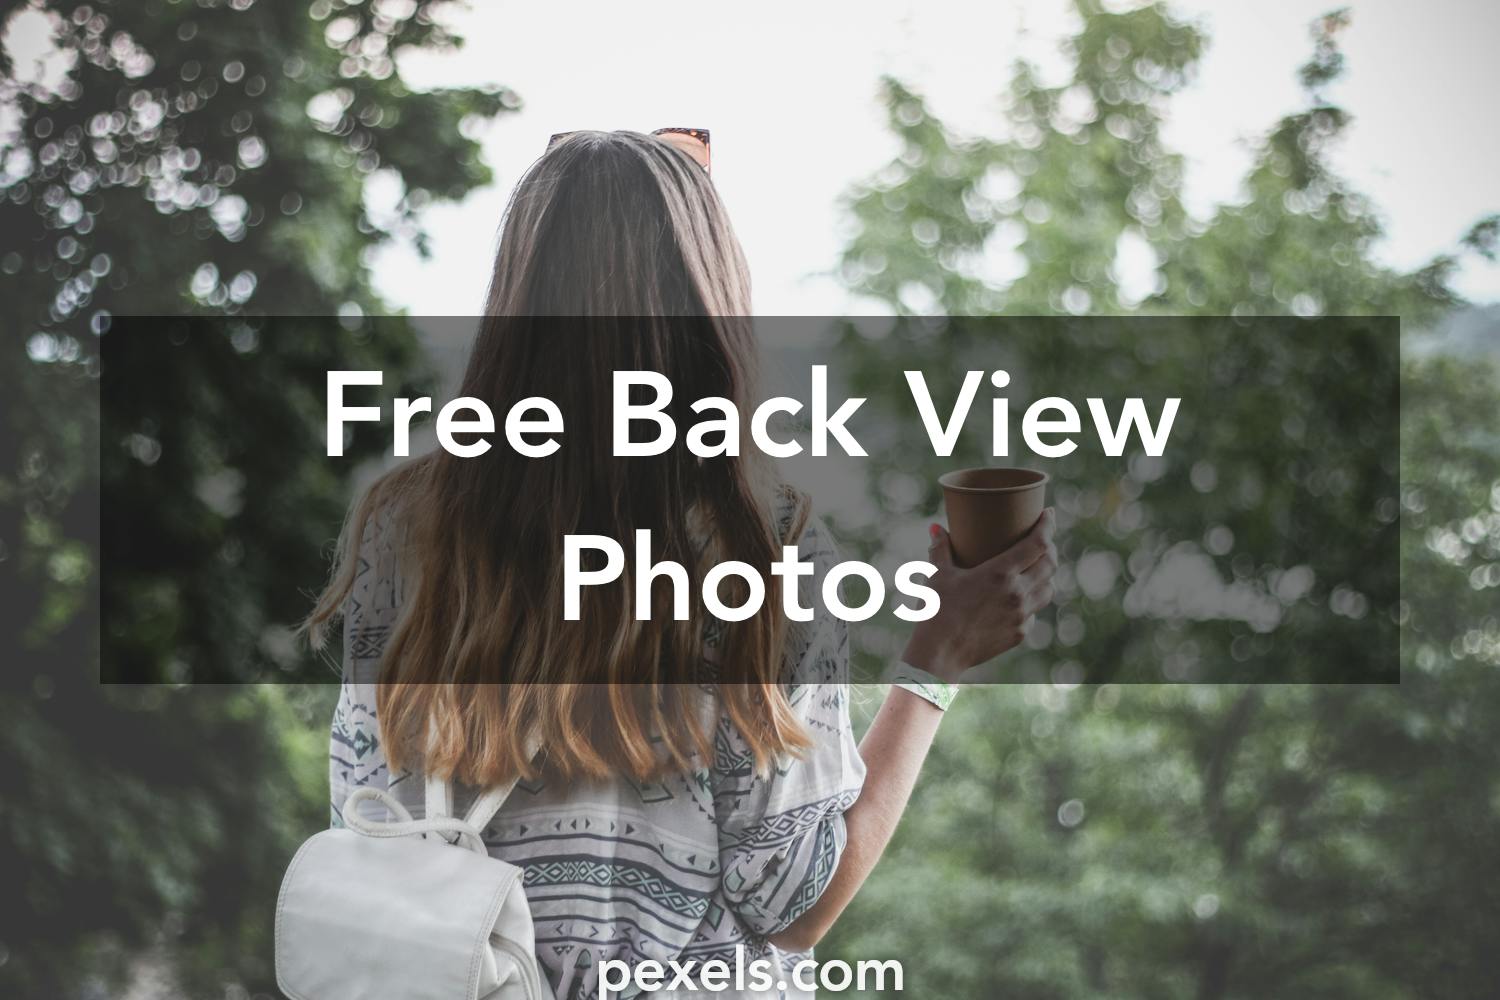 Free Stock Photos Of Back View · Pexels